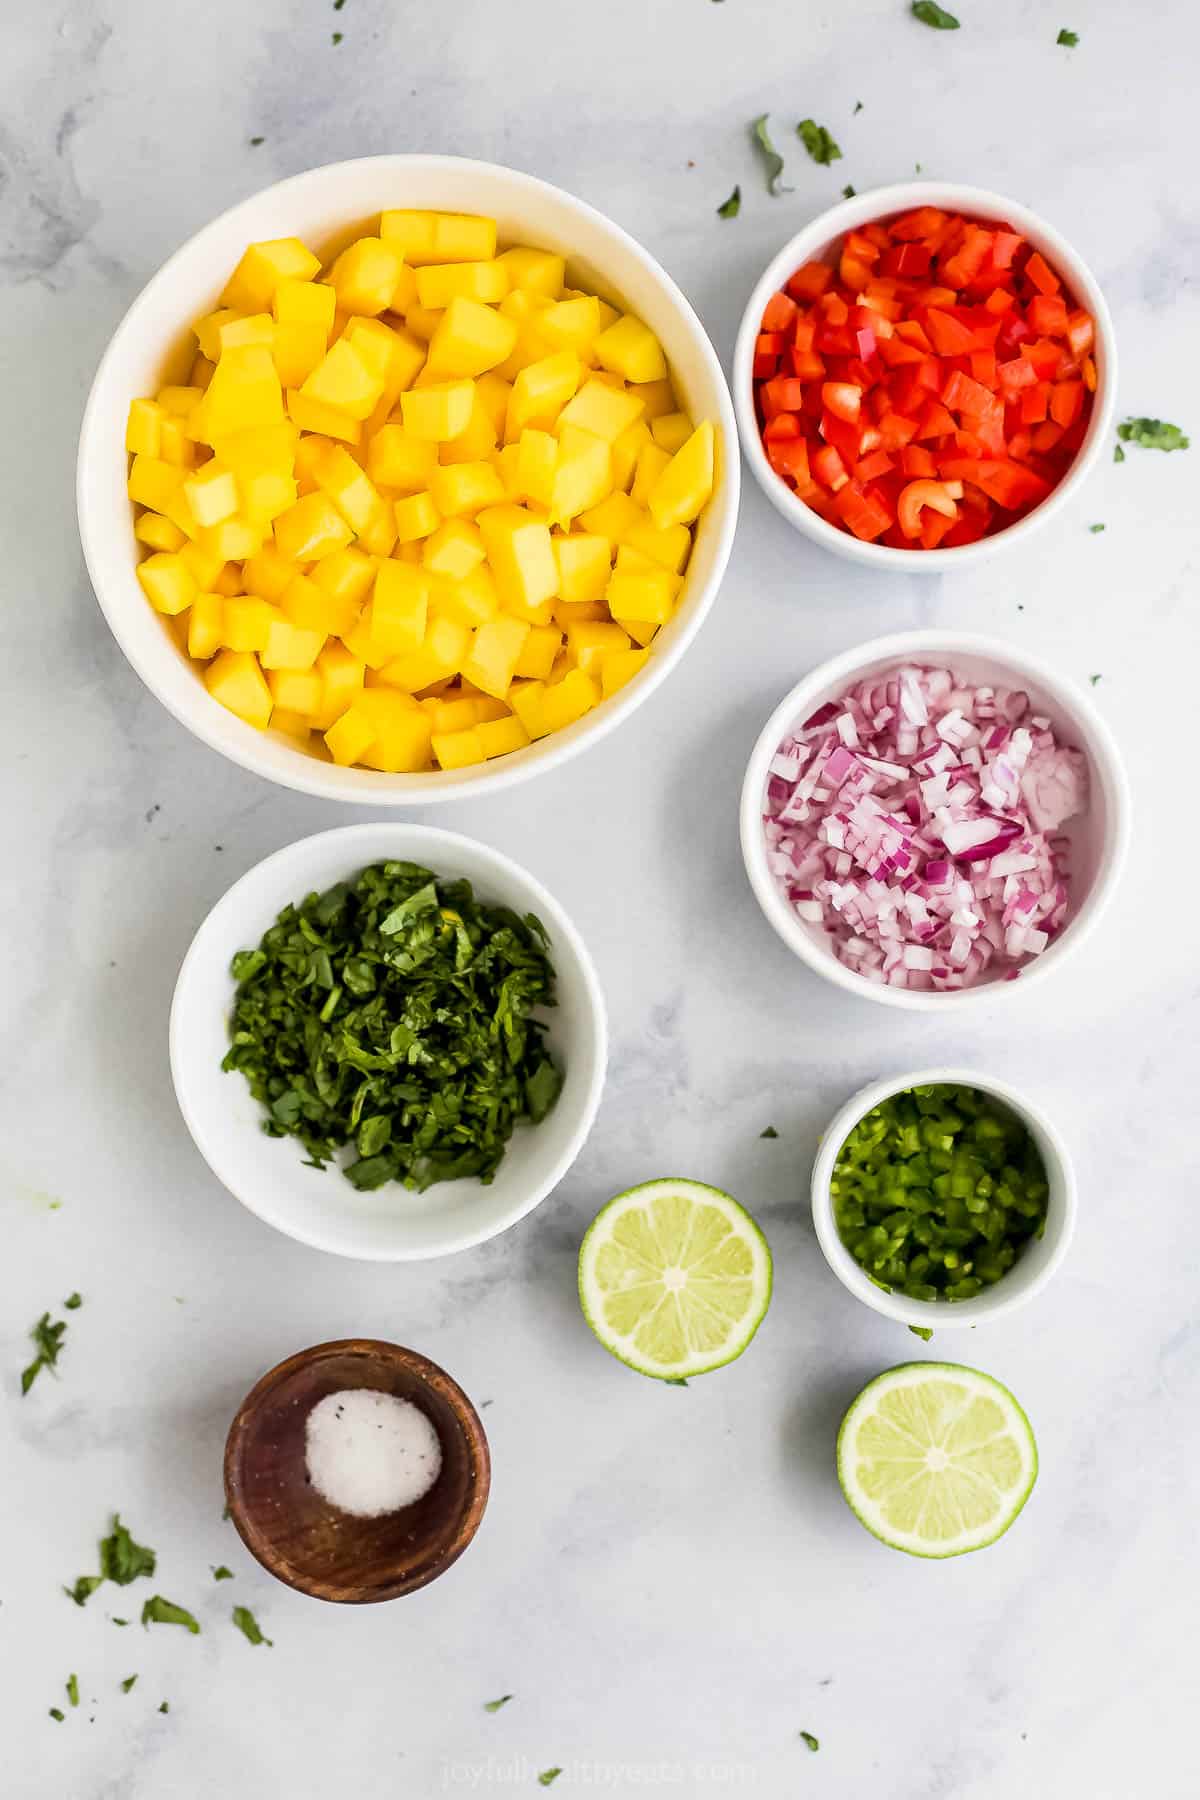 A fresh lime, diced jalapeño, salt and the rest of the ingredients arranged on a marble surface